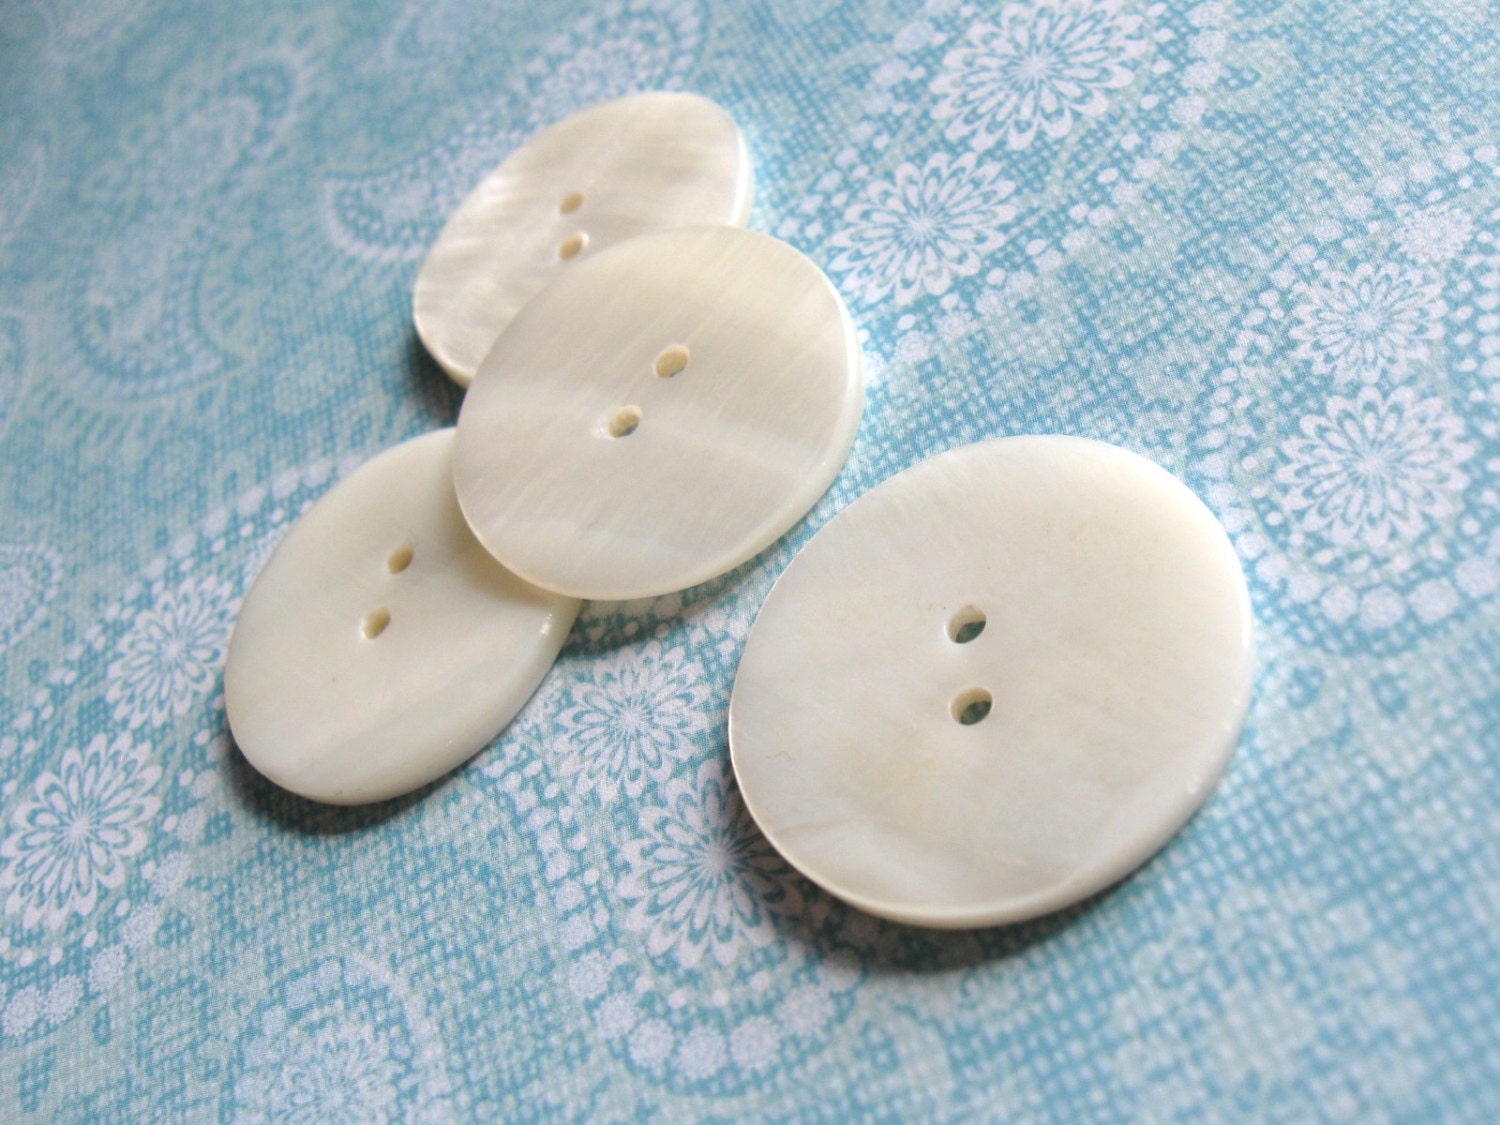 8PCS pearl flat back replacement buttons for coats pearl buttons for sewing